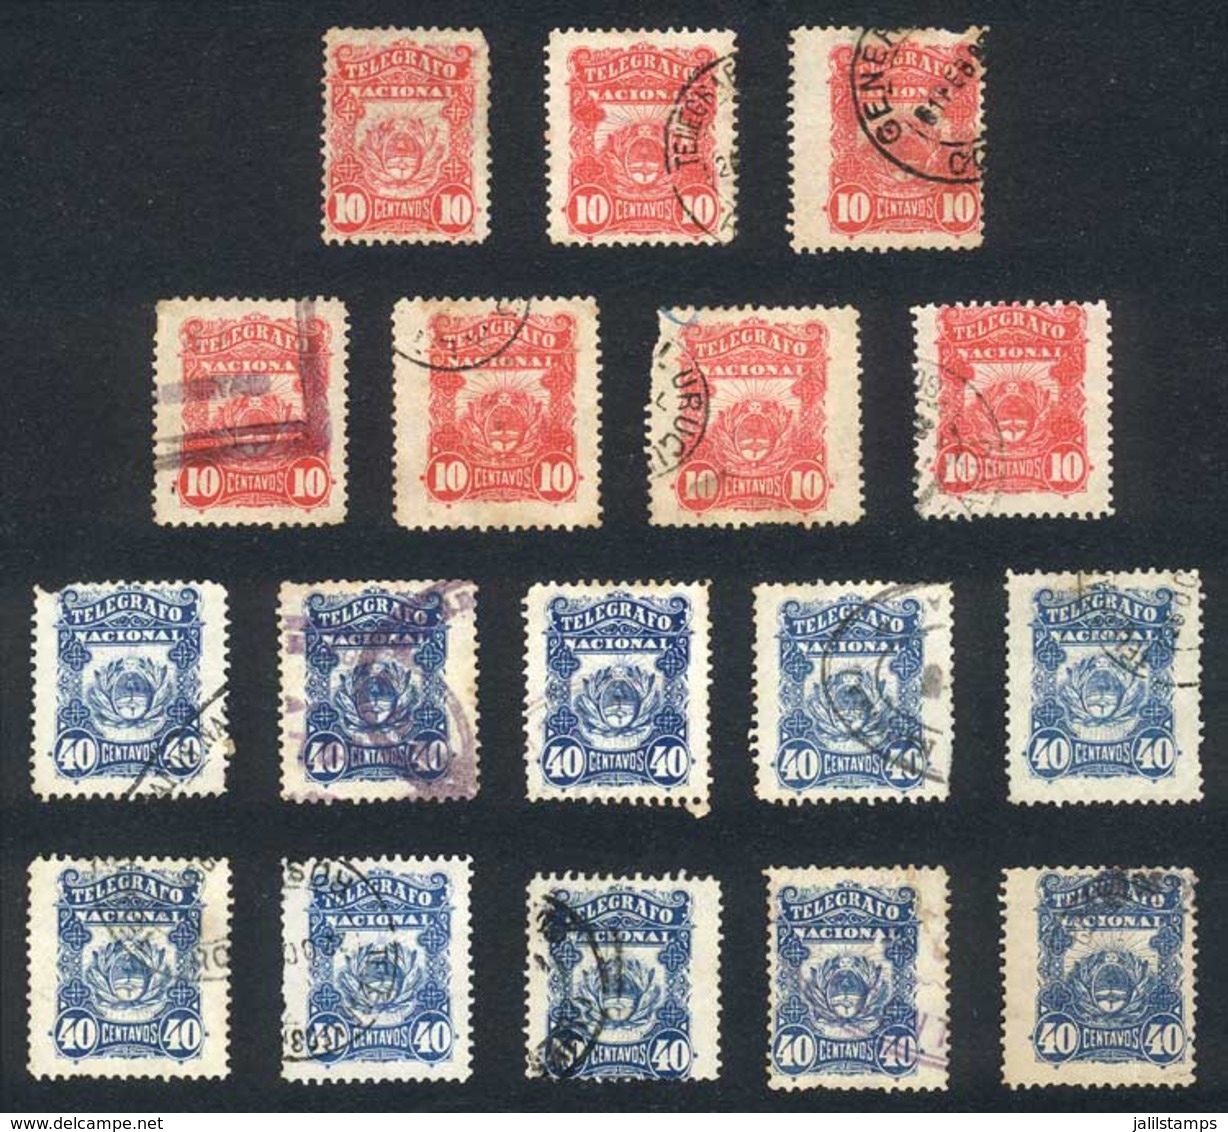 ARGENTINA: GJ.1 X7 + 3 X9 + 4, Used With Different Cancels, Some With Little Defects. It Is Unusual To Find Lots Of Thes - Telegraph